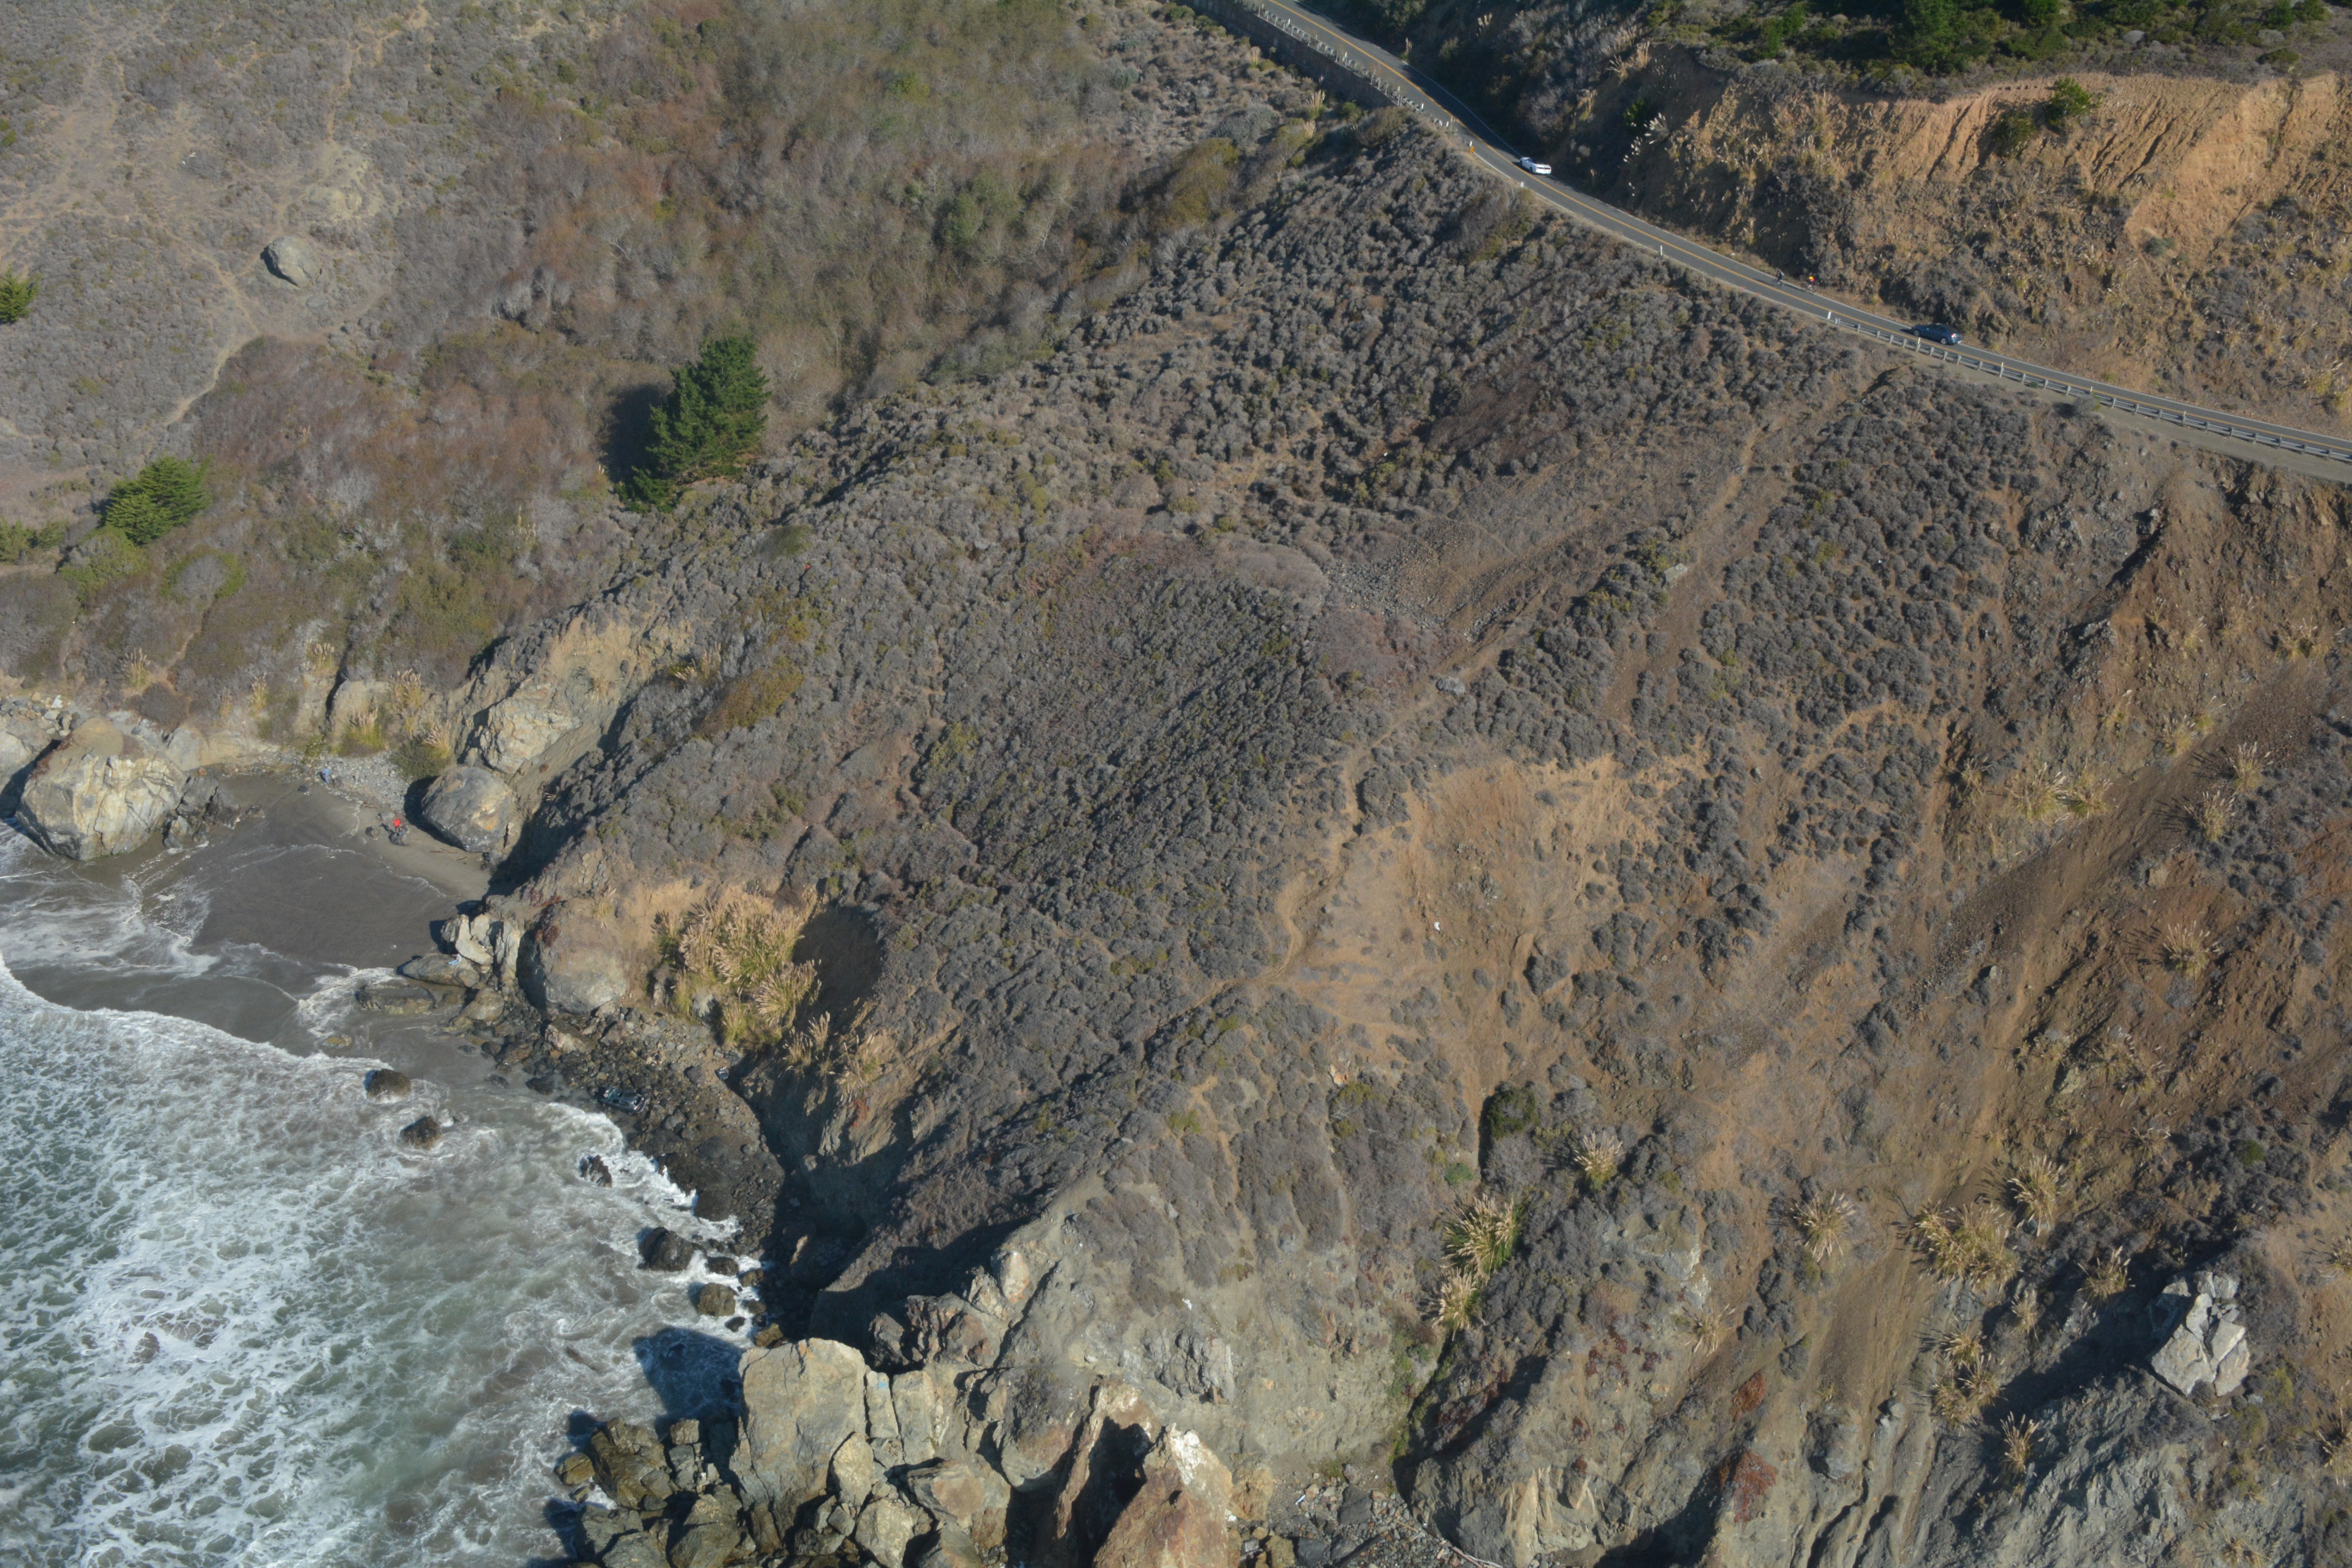 Steep cliff near Stinson Beach where a driver and passenger plunged, landing on the ocean and rocks below. (CHP)